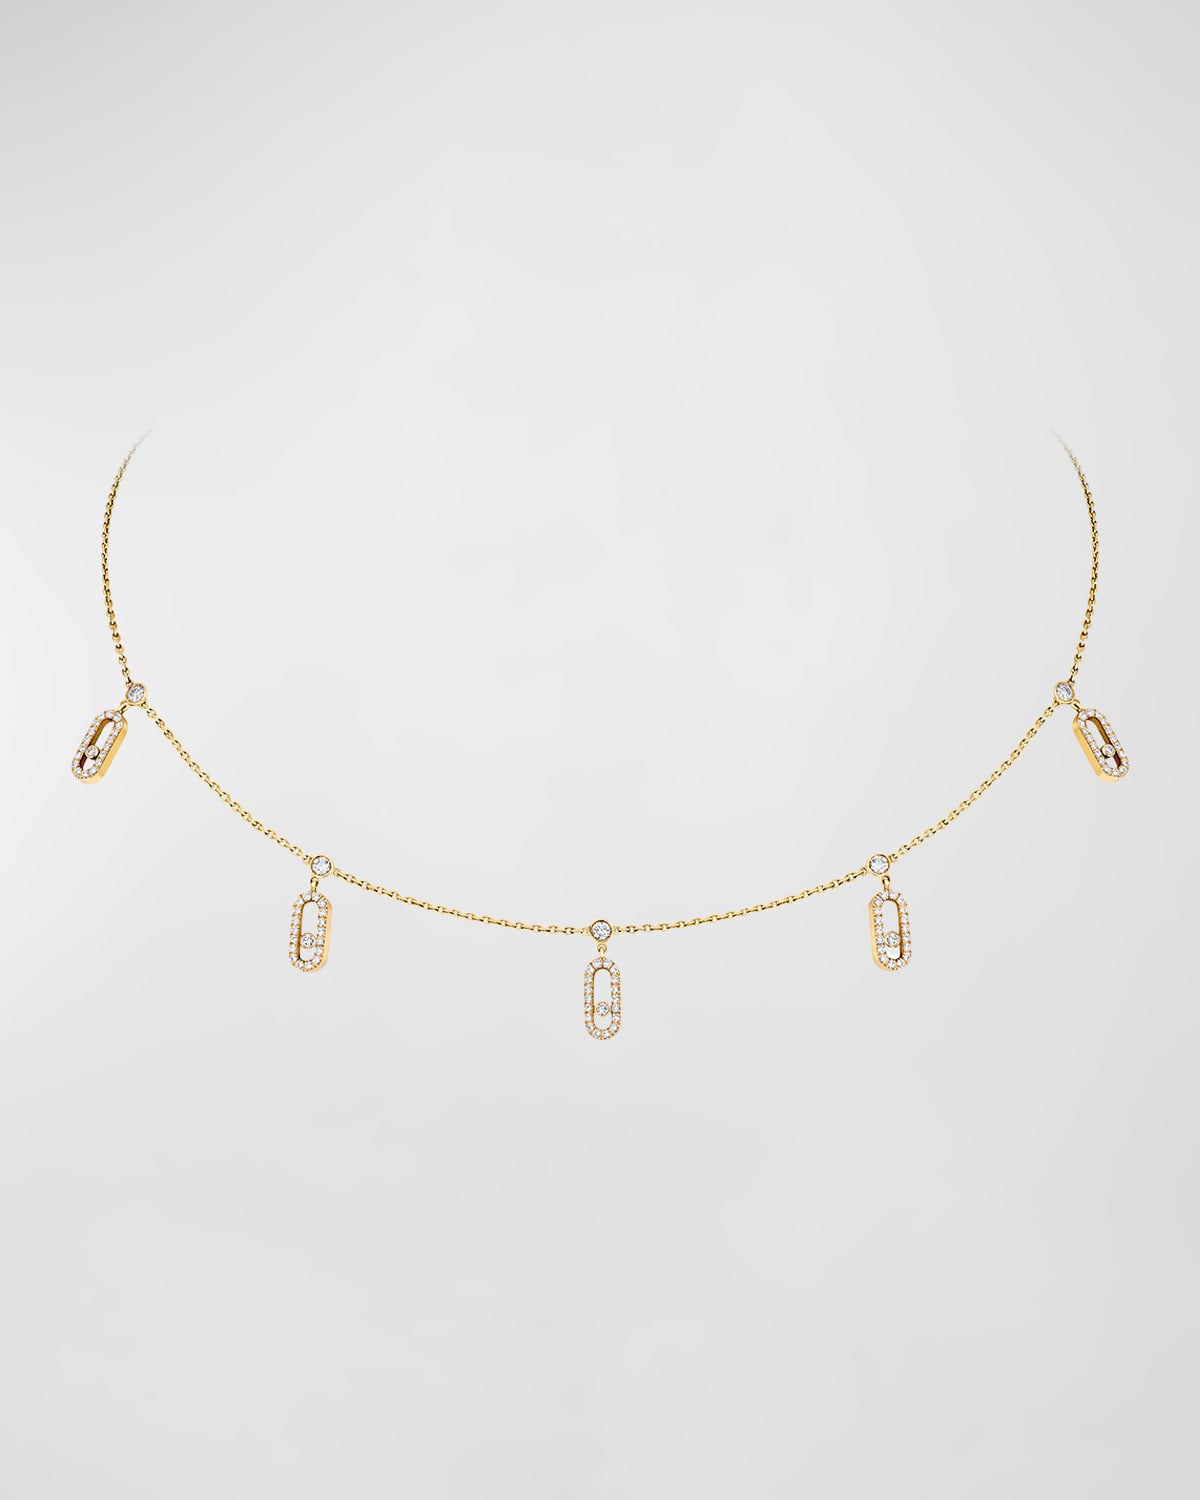 Move Uno Charm Choker Necklace in 18K Yellow Gold